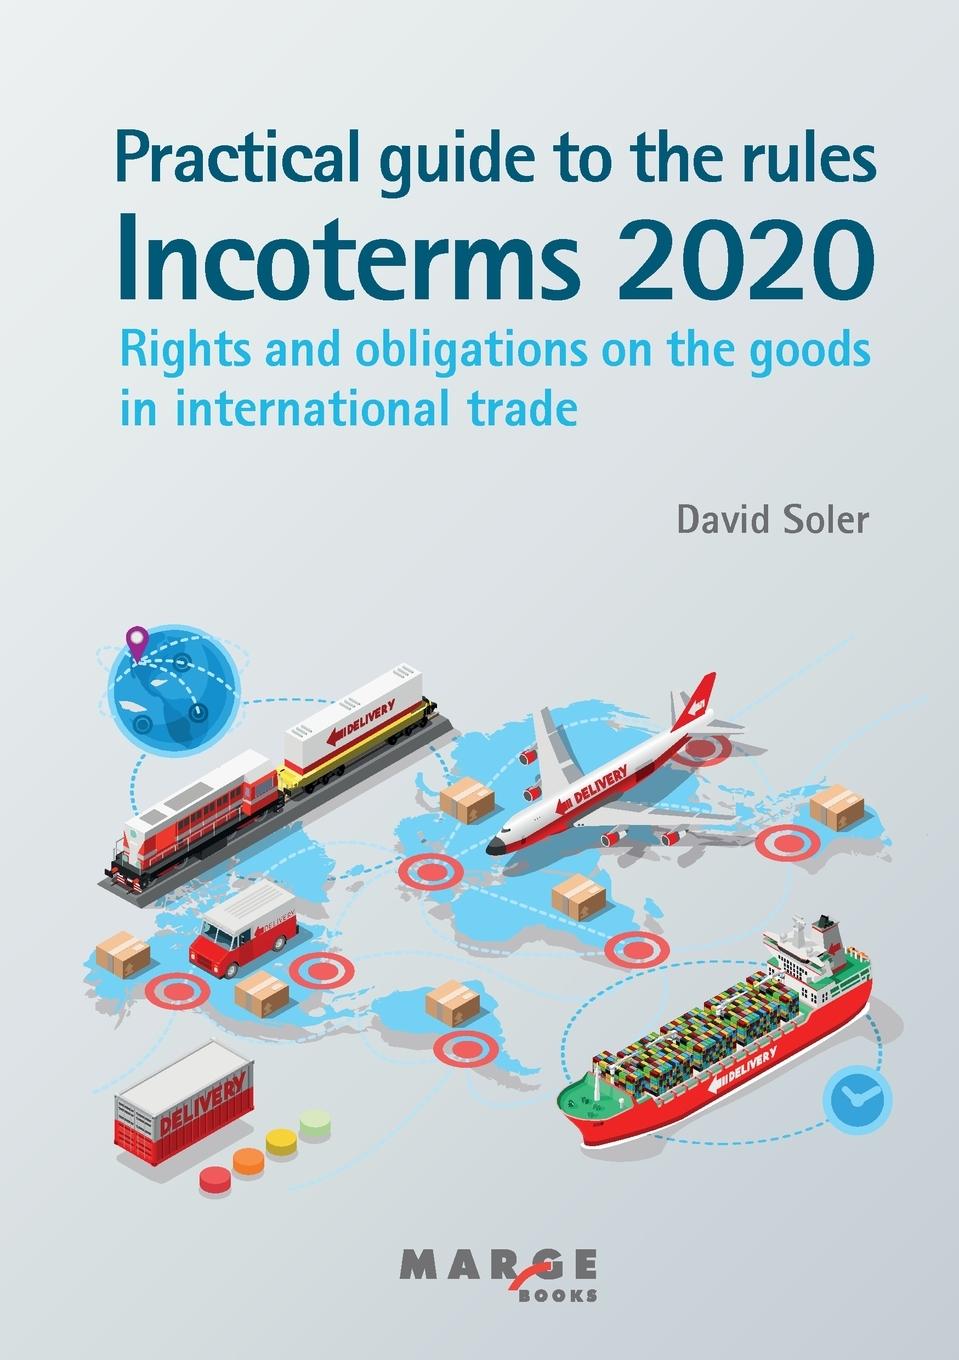 Book Practical guide to the Incoterms 2020 rules David Soler